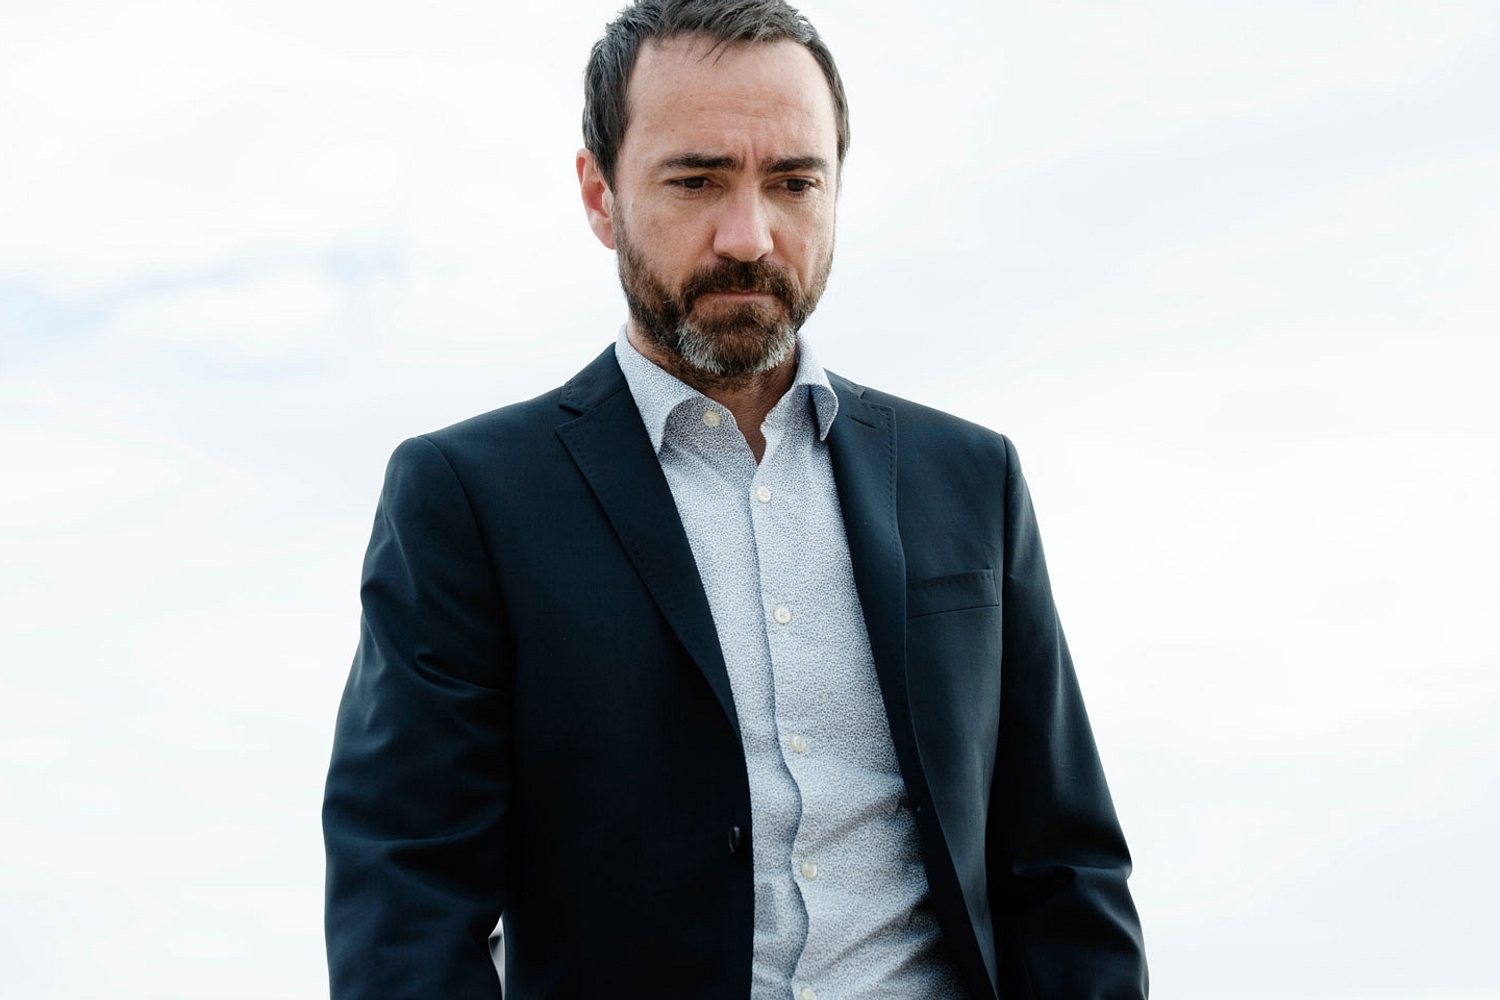 Hear ‘The Shins’, a track from James Mercer’s old band